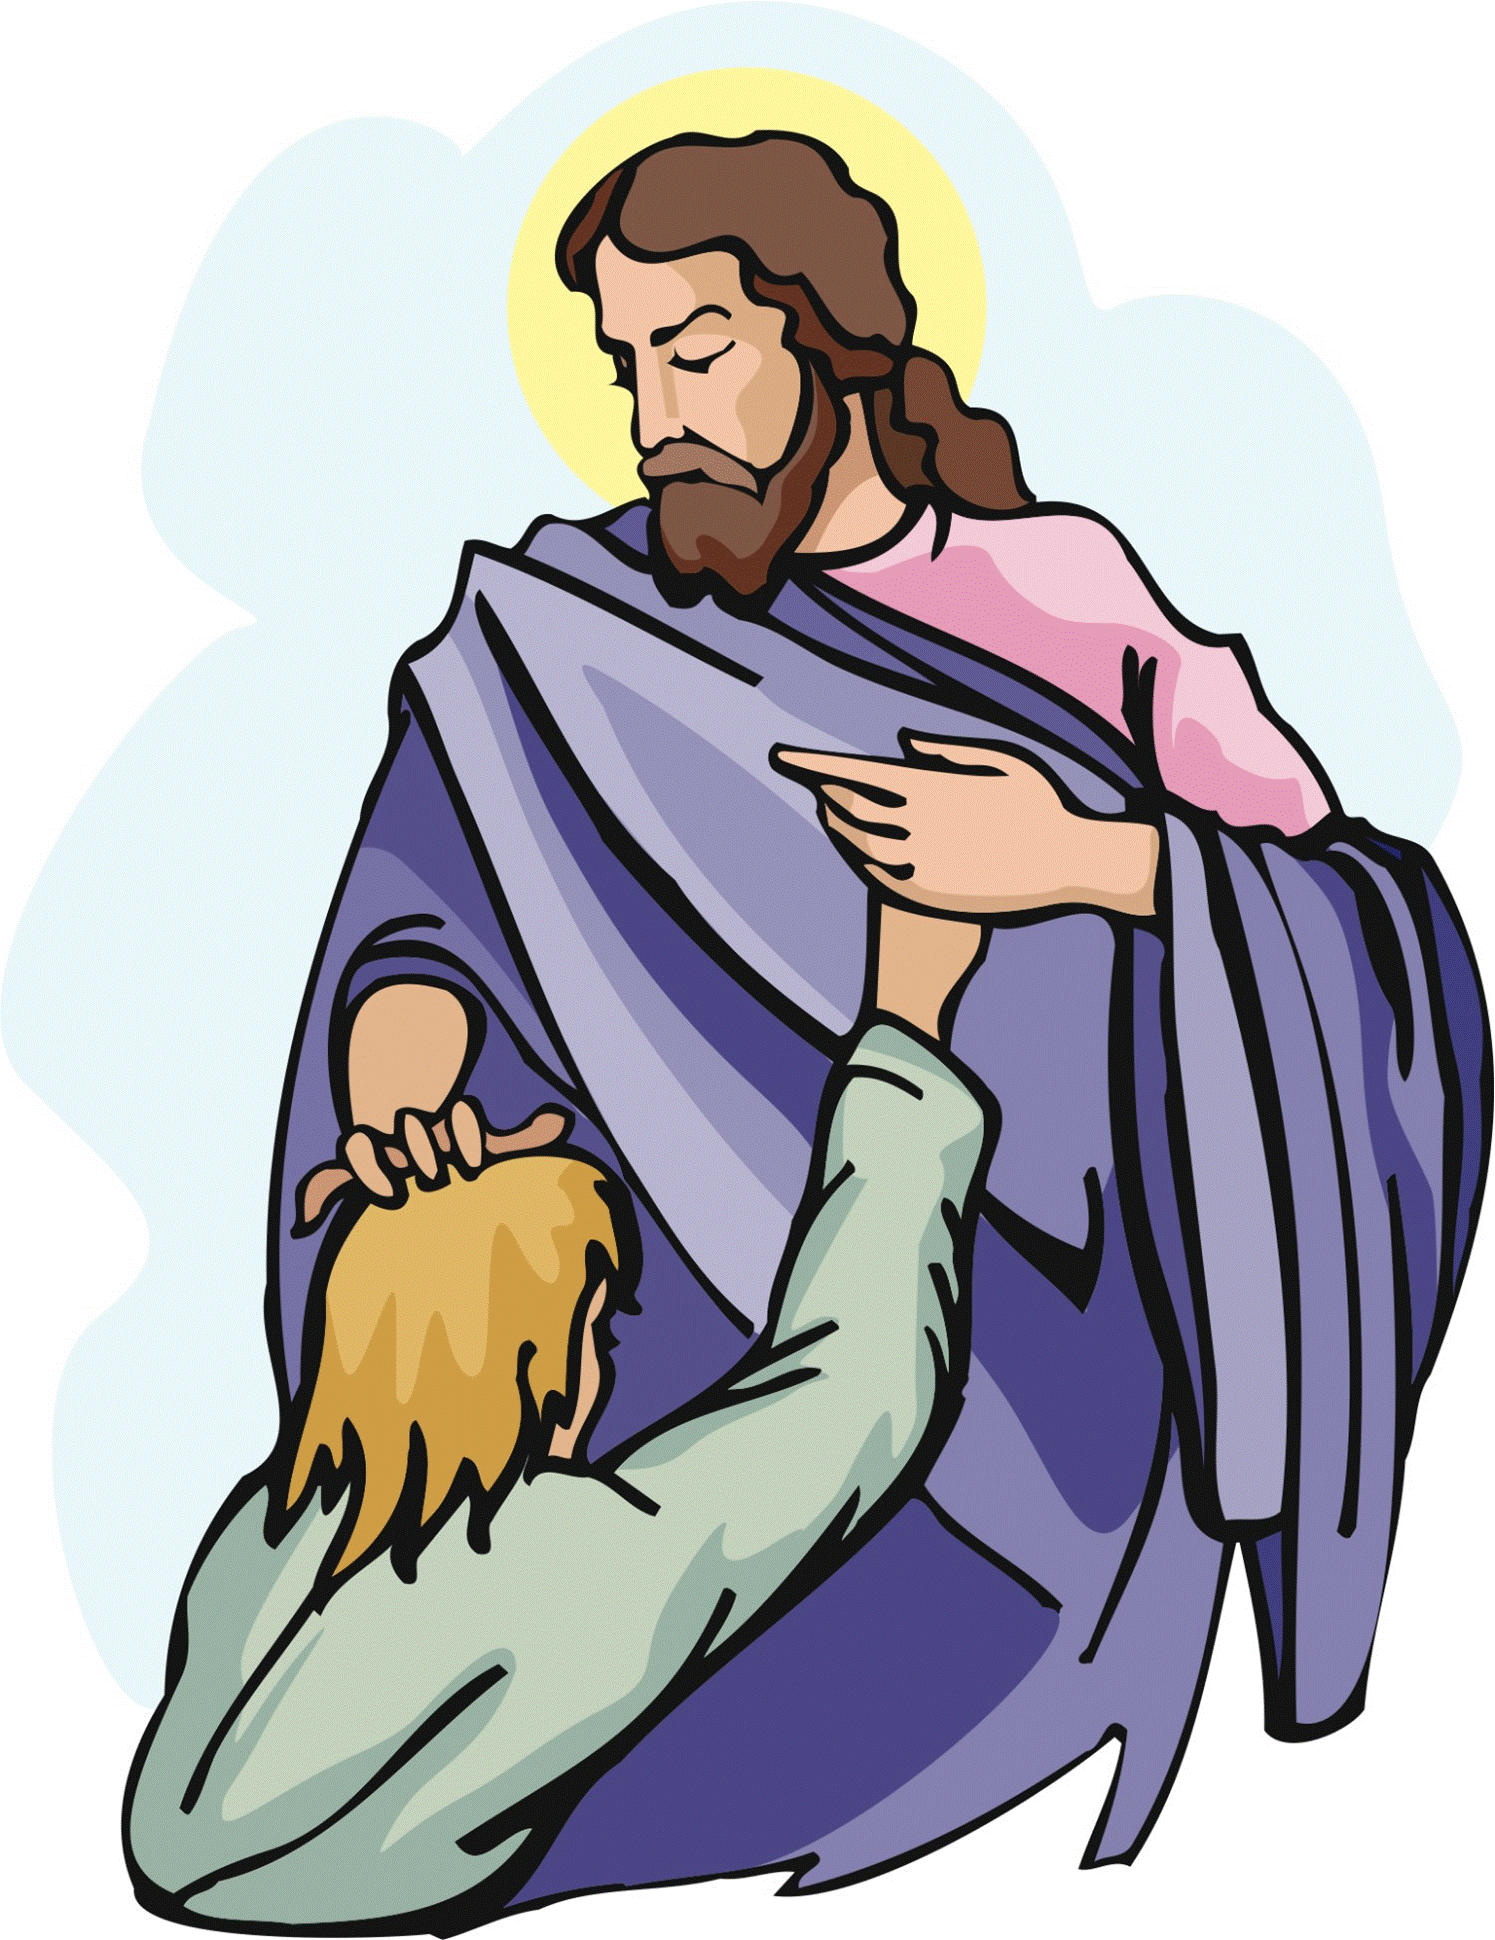 jesus clipart miracle